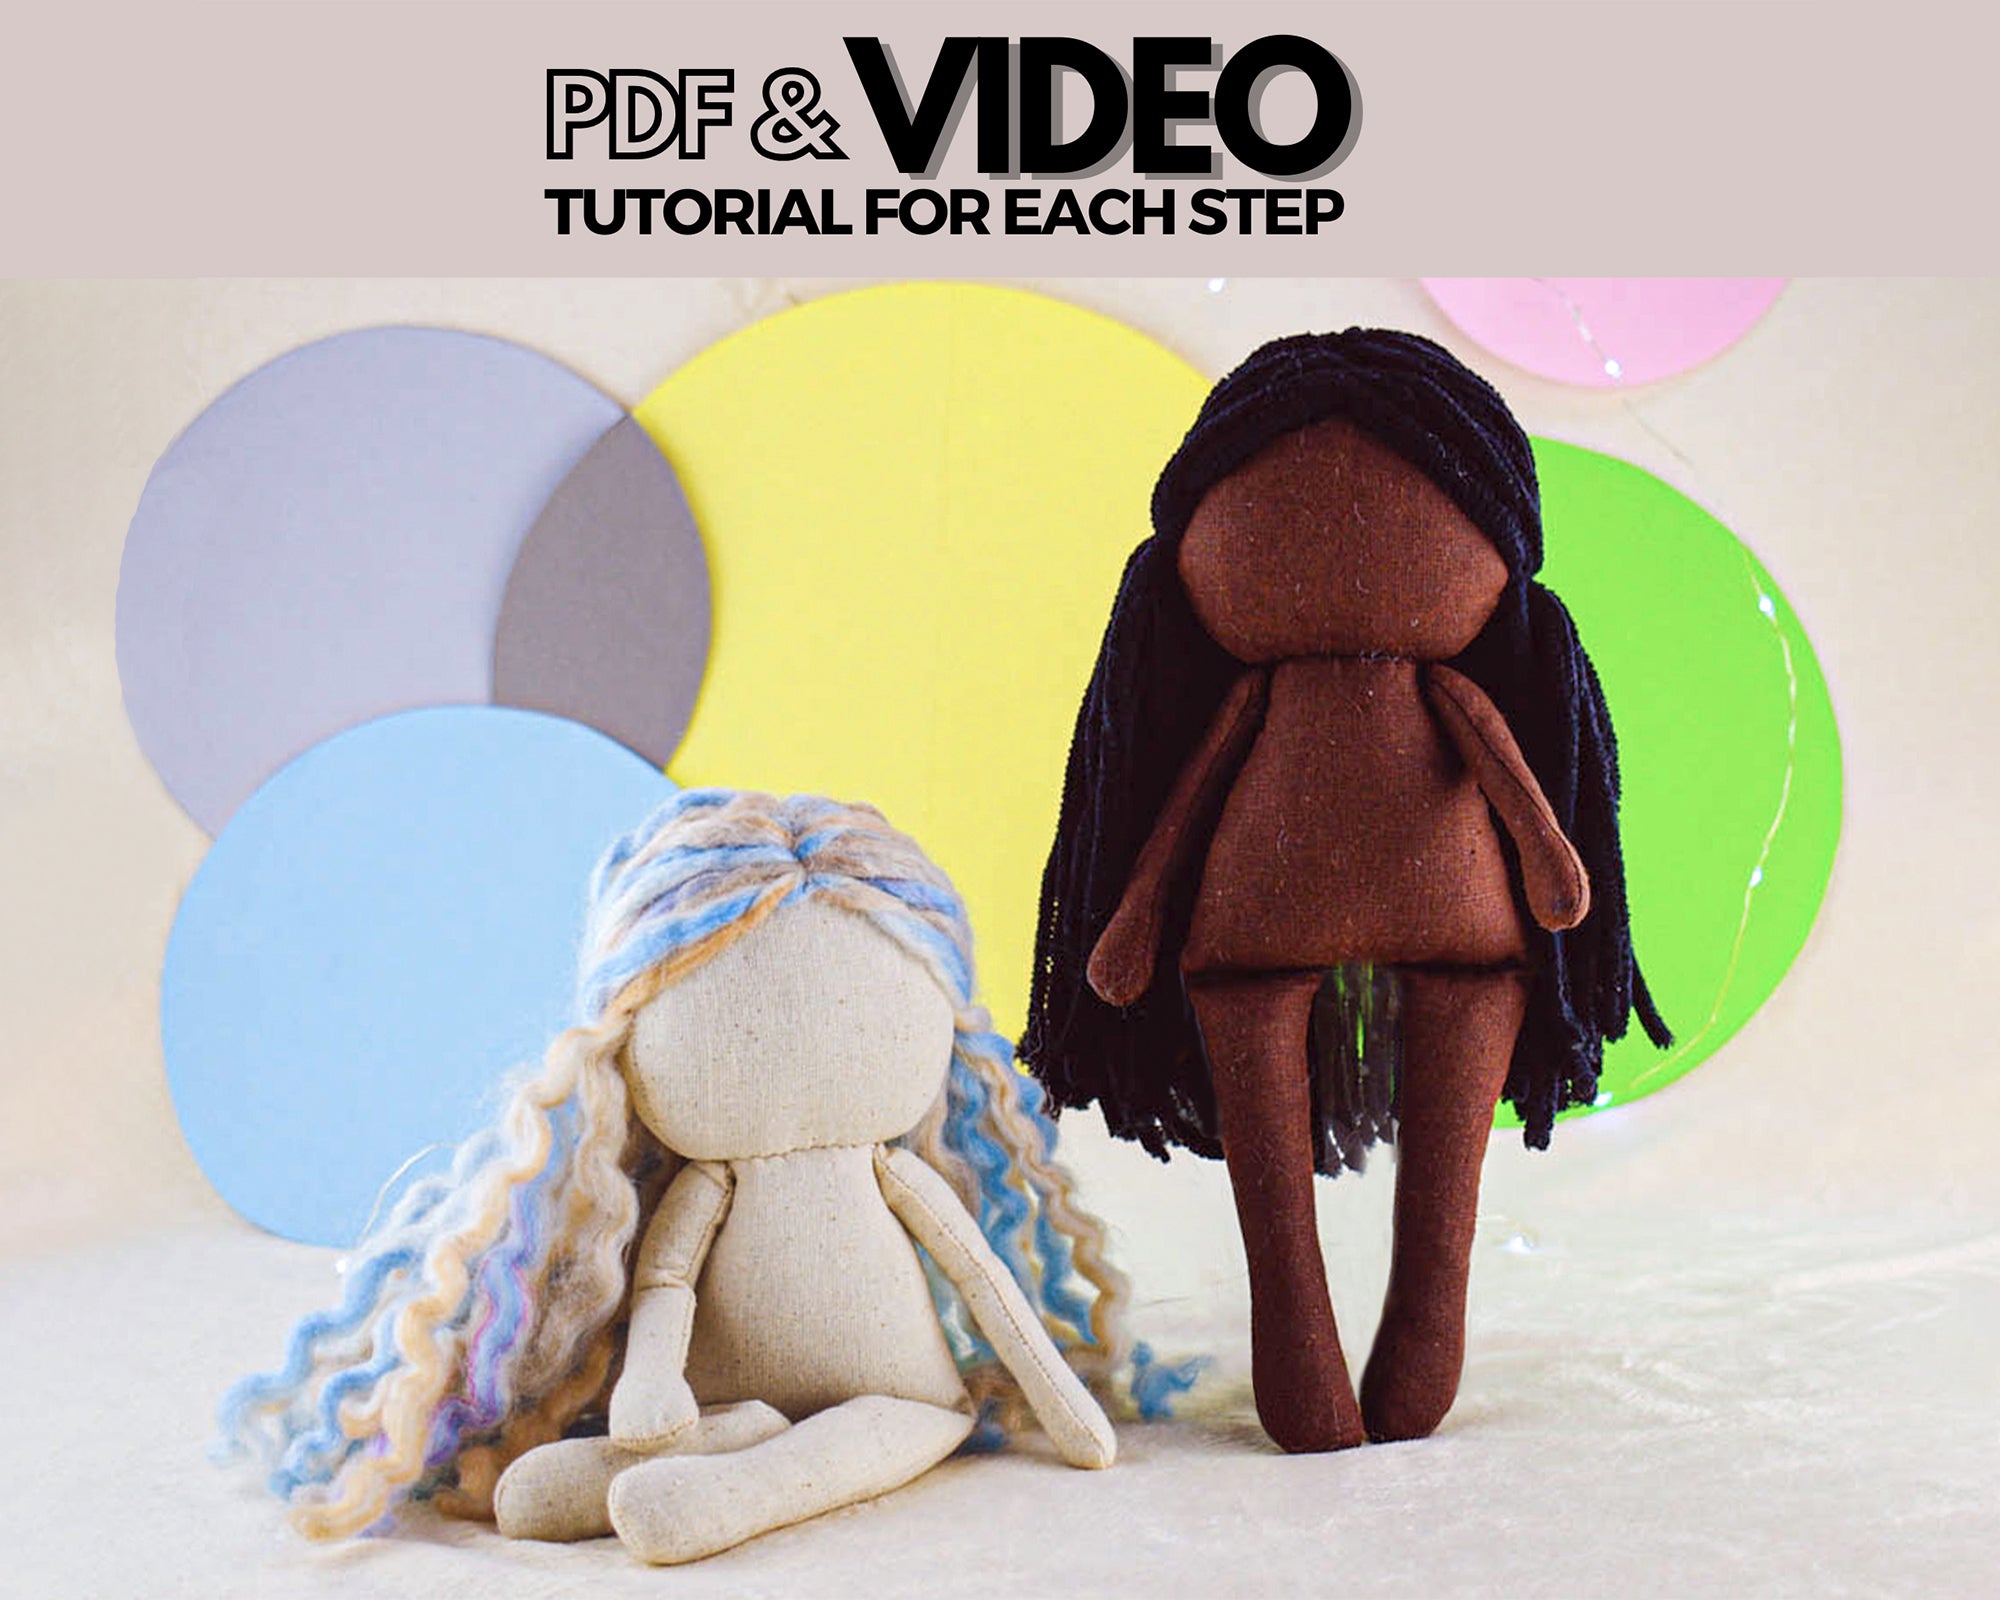 Doll Body 10 inch - PDF sewing pattern and tutorial – Petras Wonderland